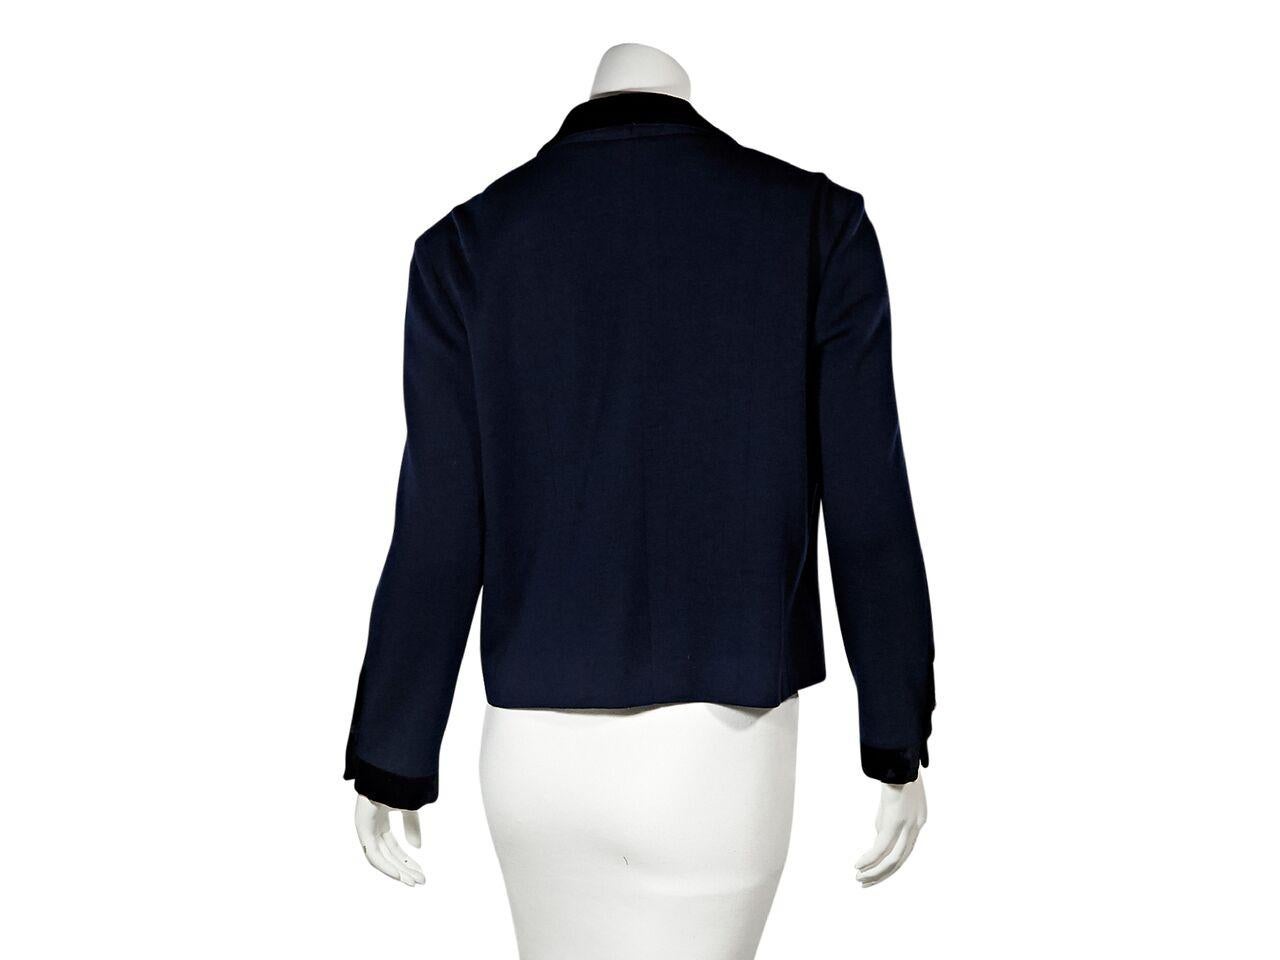 Product details:  Vintage navy blue and black jacket by Chanel.  Trimmed with velvet.  Notched lapel.  Long sleeves.  Button-front closure.  Button front pockets.  Goldtone hardware.  Bust 40